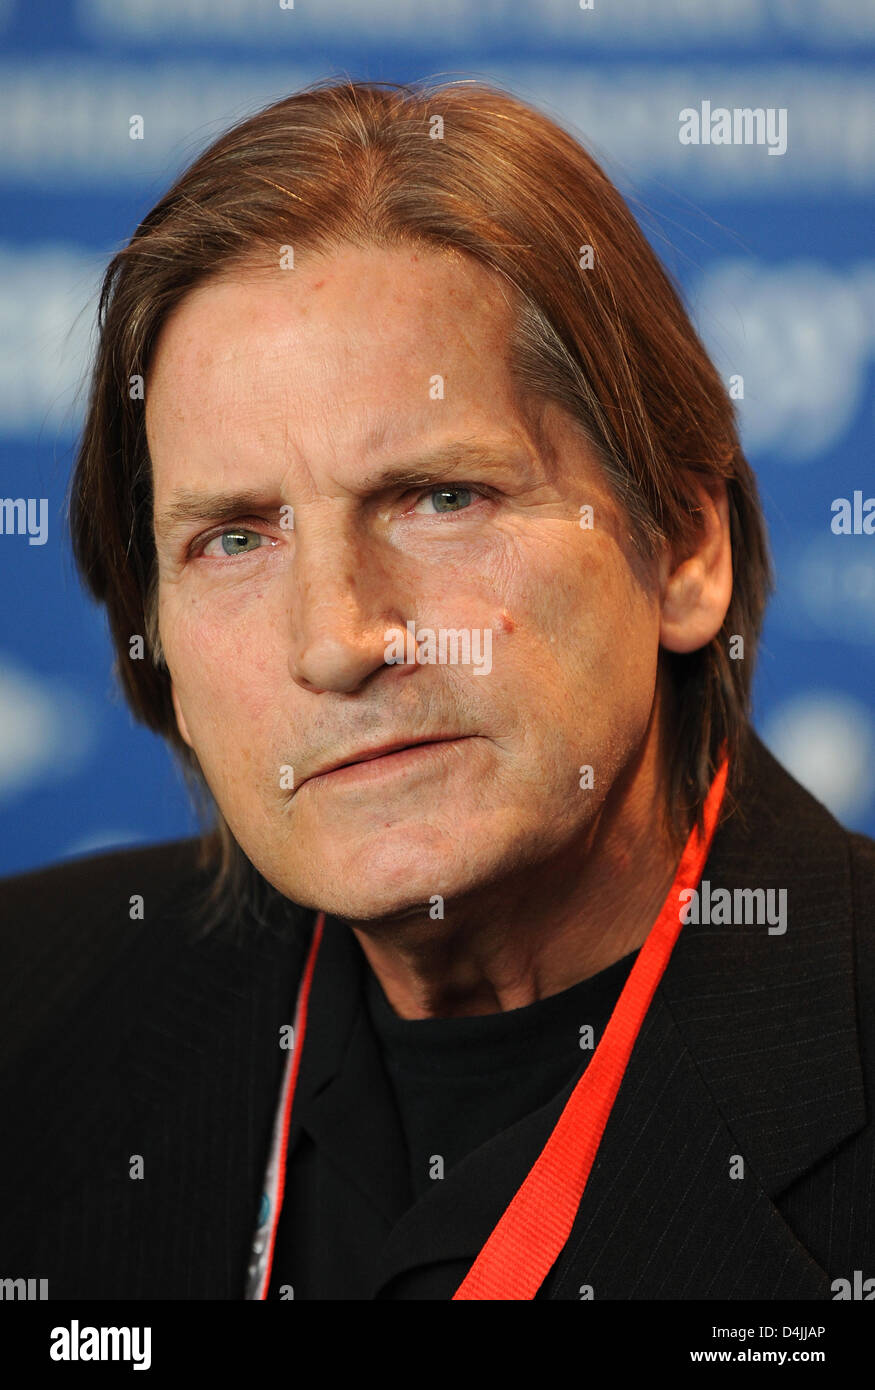 Actor Joe Dallesandro poses during the photo call for the film ?Little Joe? at the 59th Berlin International Film Festival in Berlin, Germany, 12 February 2009. The film runs in the section ?Panorama Documents?. 18 films compete for the Silver and Golden Bear awards at the 59th Berlinale. Photo: Photo: Joerg Carstensen Stock Photo